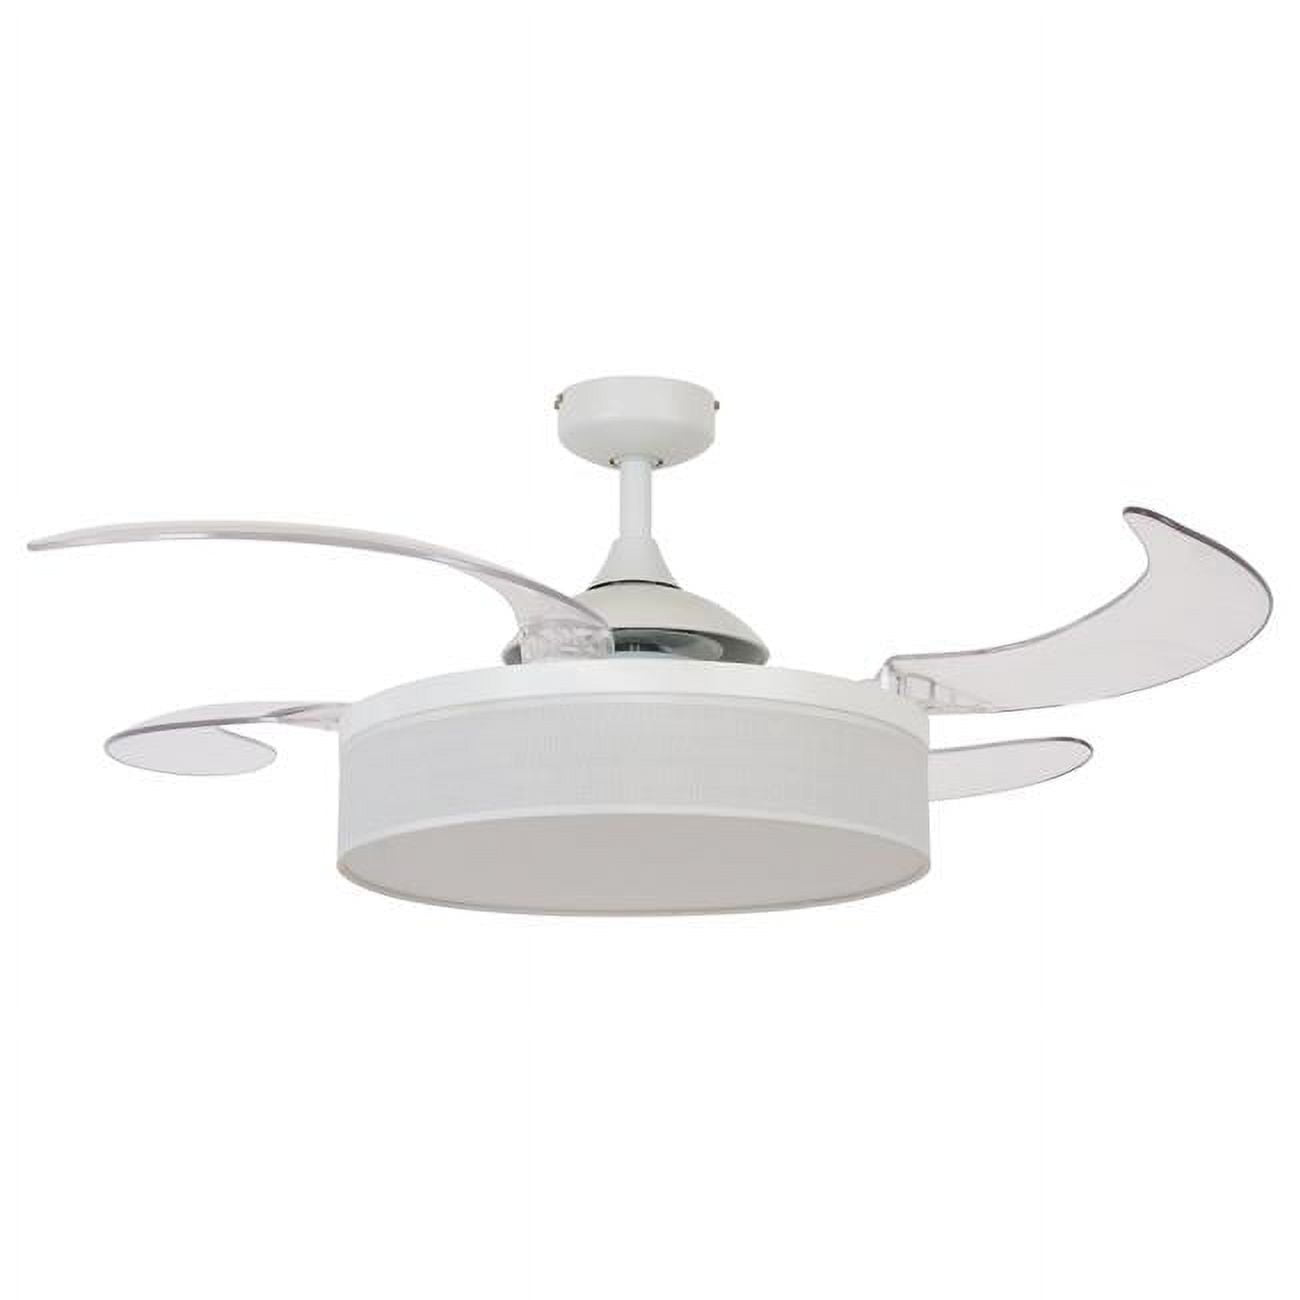 Picture of Fanaway 51103001 Fraser 48-inch White and Transparent AC Ceiling Fan with Light